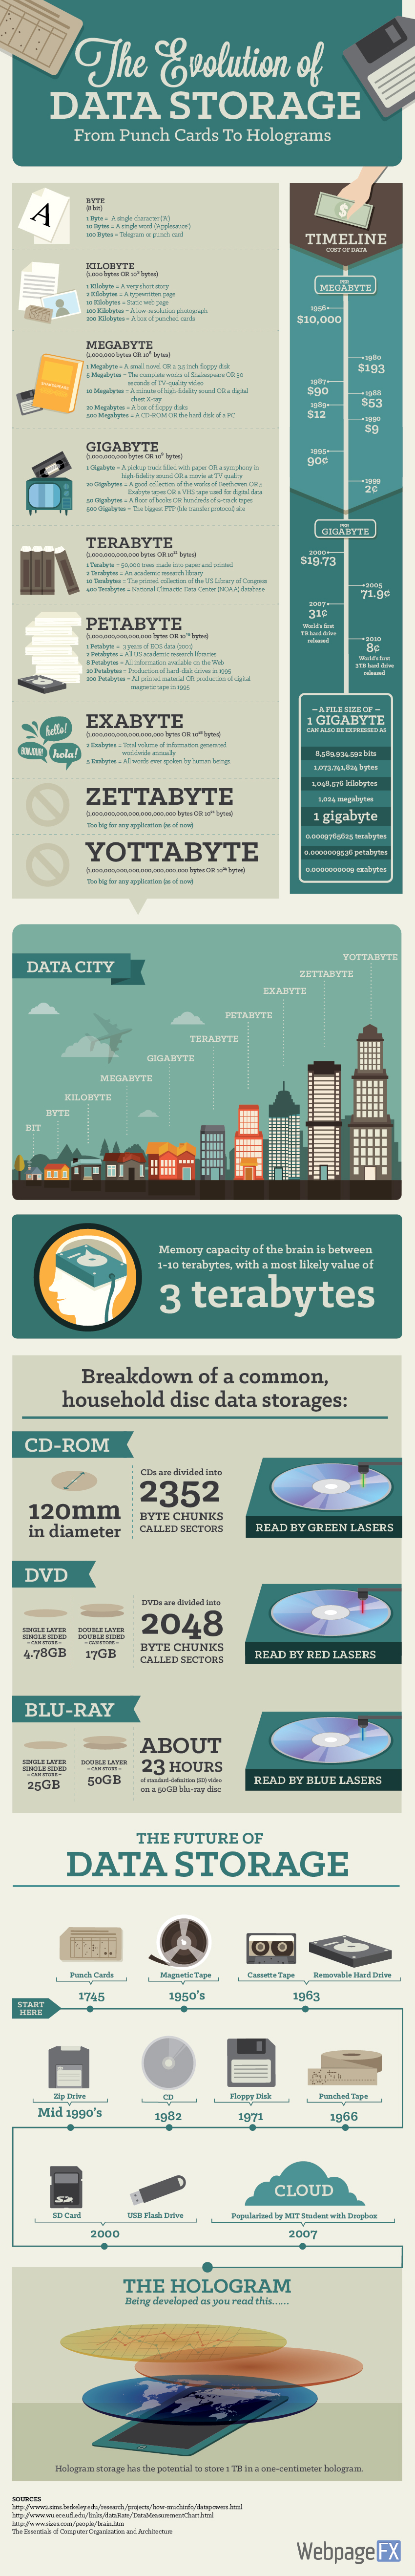 From Punch Cards To Holograms: The Evolution of Data Storage